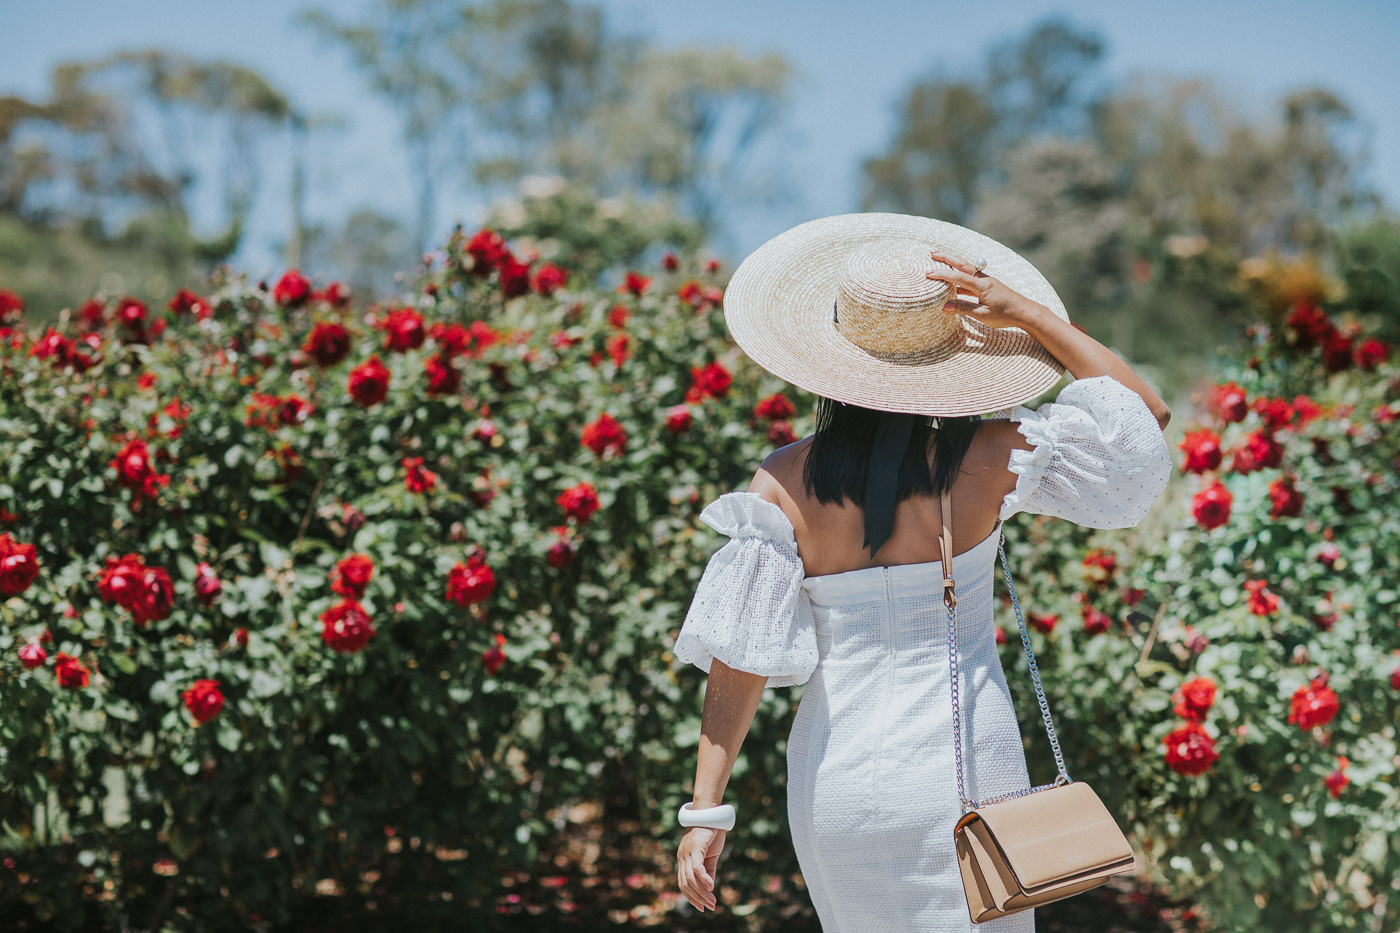 girl from back not showing face with large hat and roses